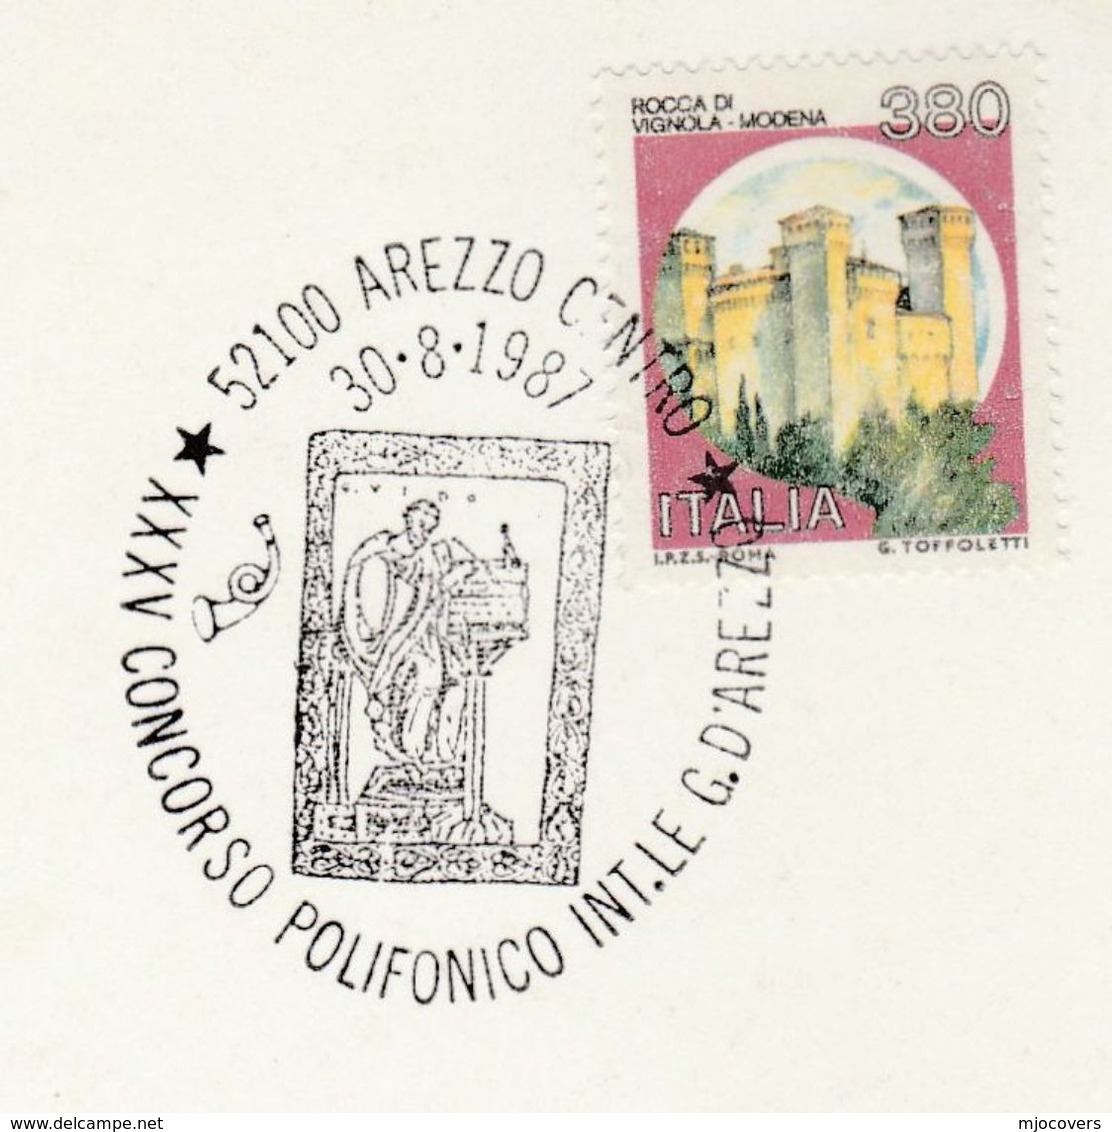 1987 Cover  AREZZO  POLYPHONIC Choral MUSIC  EVENT COVER Card Italy Stamps - 1981-90: Marcophilia